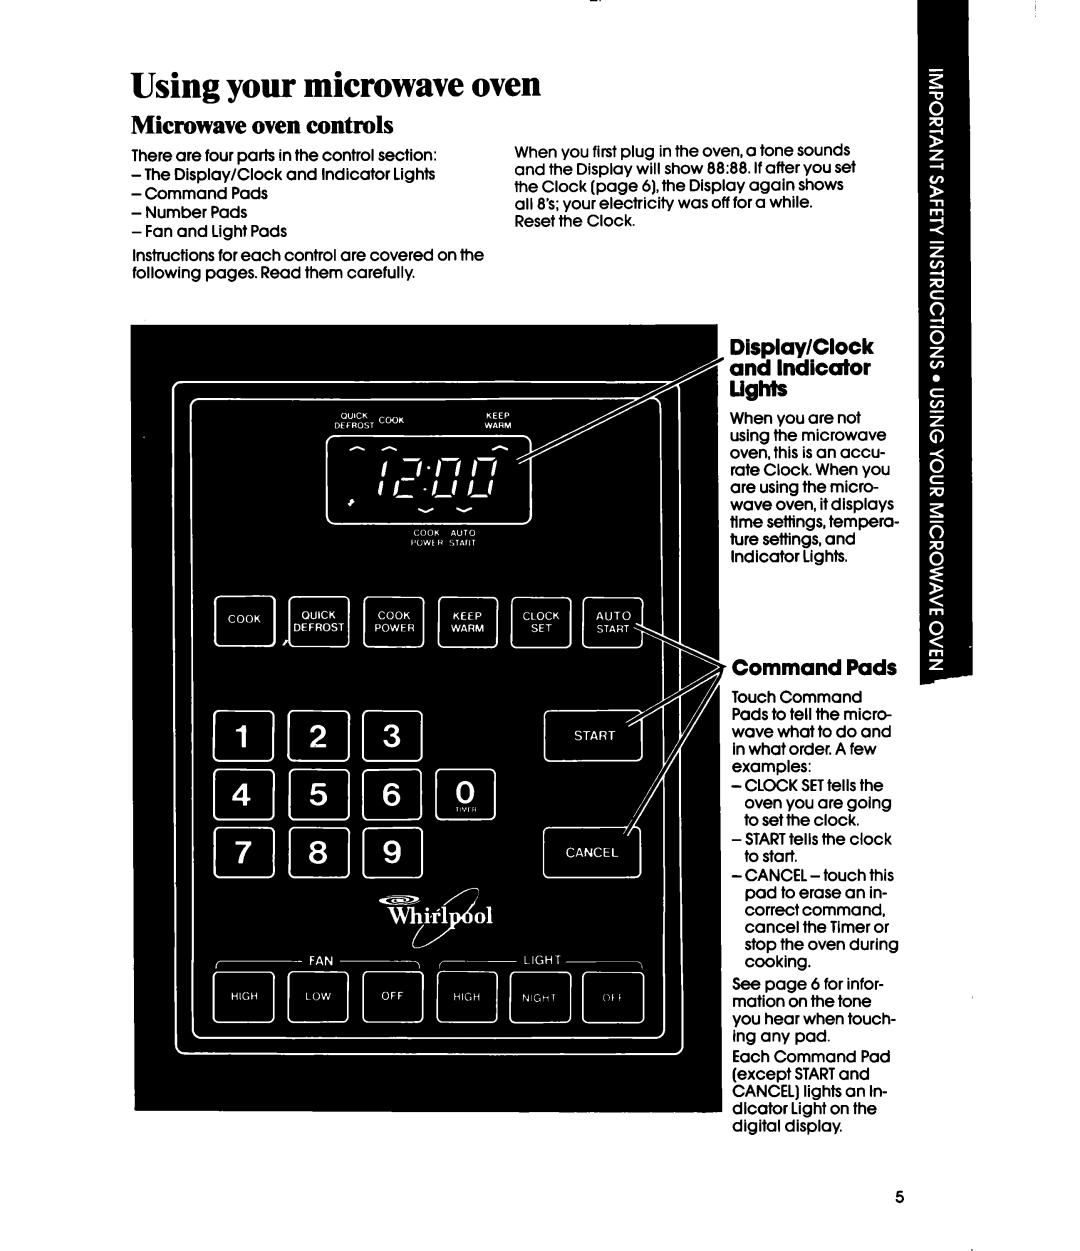 Whirlpool MH6100XY manual Using your microwave oven, Microwave oven controls, Command Pads 